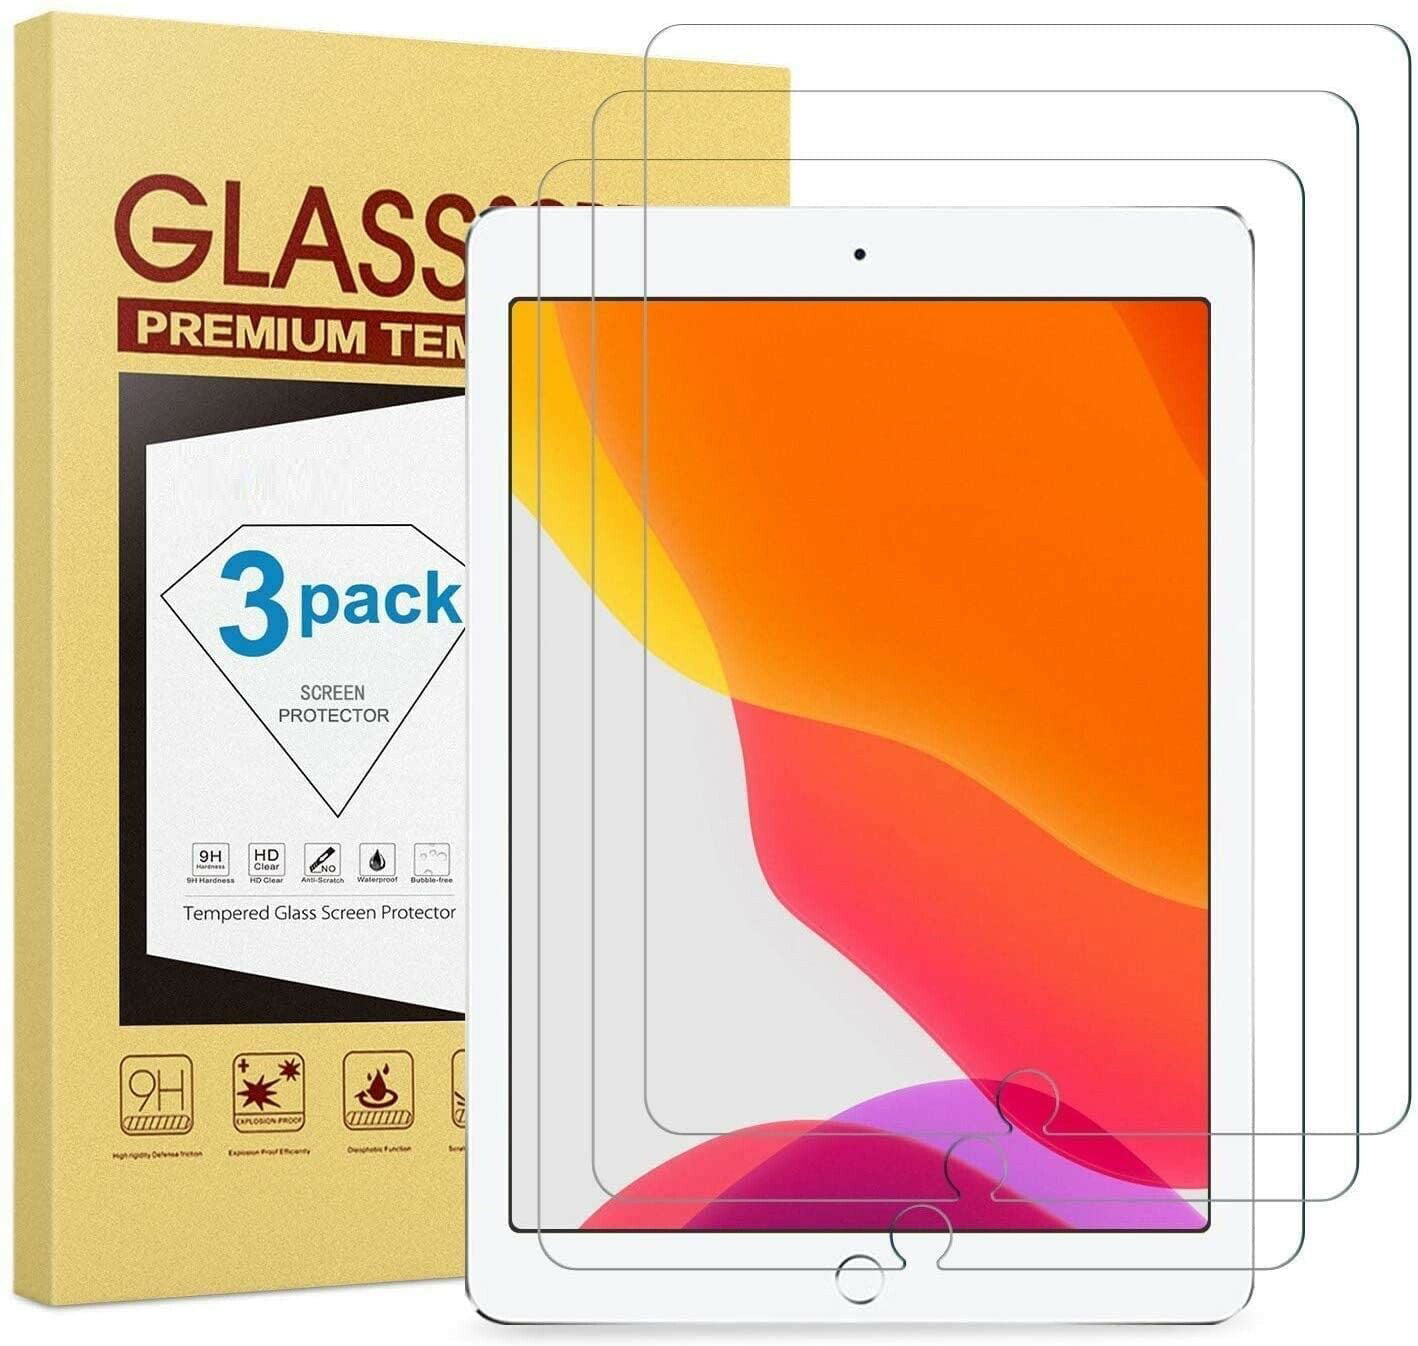 2 Pack Tempered GLASS Screen Protector for Apple iPad 9.7 2nd 3rd 4th Gen KIQ 